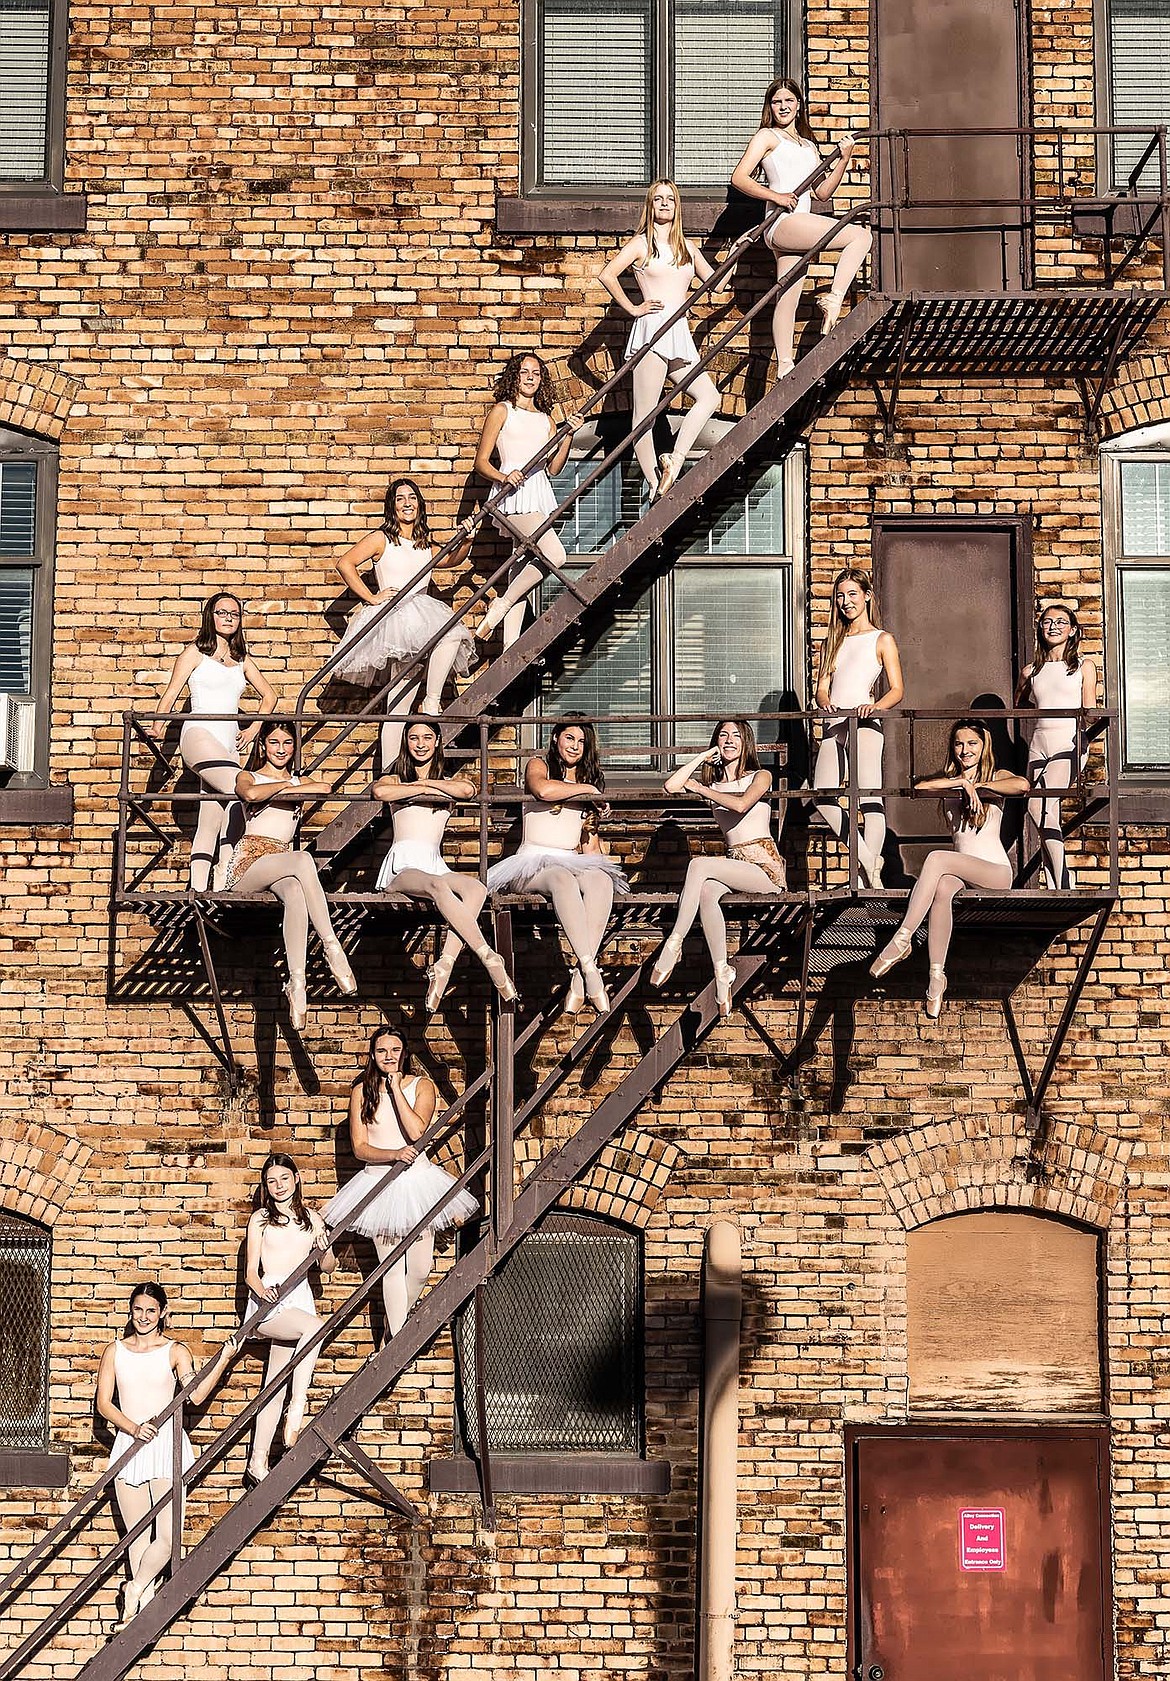 The Noble Dance Performing Company includes upper stairs from left, Morgan Friar, Ella Gerbozy, Rita Henshaw, Reghan Donahue; middle row, Merrel Cooley, Cecilia Molter, Ananda Tadje-Soifer, Bella Jepsen, Mia Gannon, Karissa Jepsen, Lucia Ghekiere, Taylor McCracken; lower stairs, Abby Hepworth, Tove Davies and Eden Rodriguez. Not pictured are Brie Treat and Maggie Giffin. (Photo courtesy Wayne Murphy of JMK Photography)